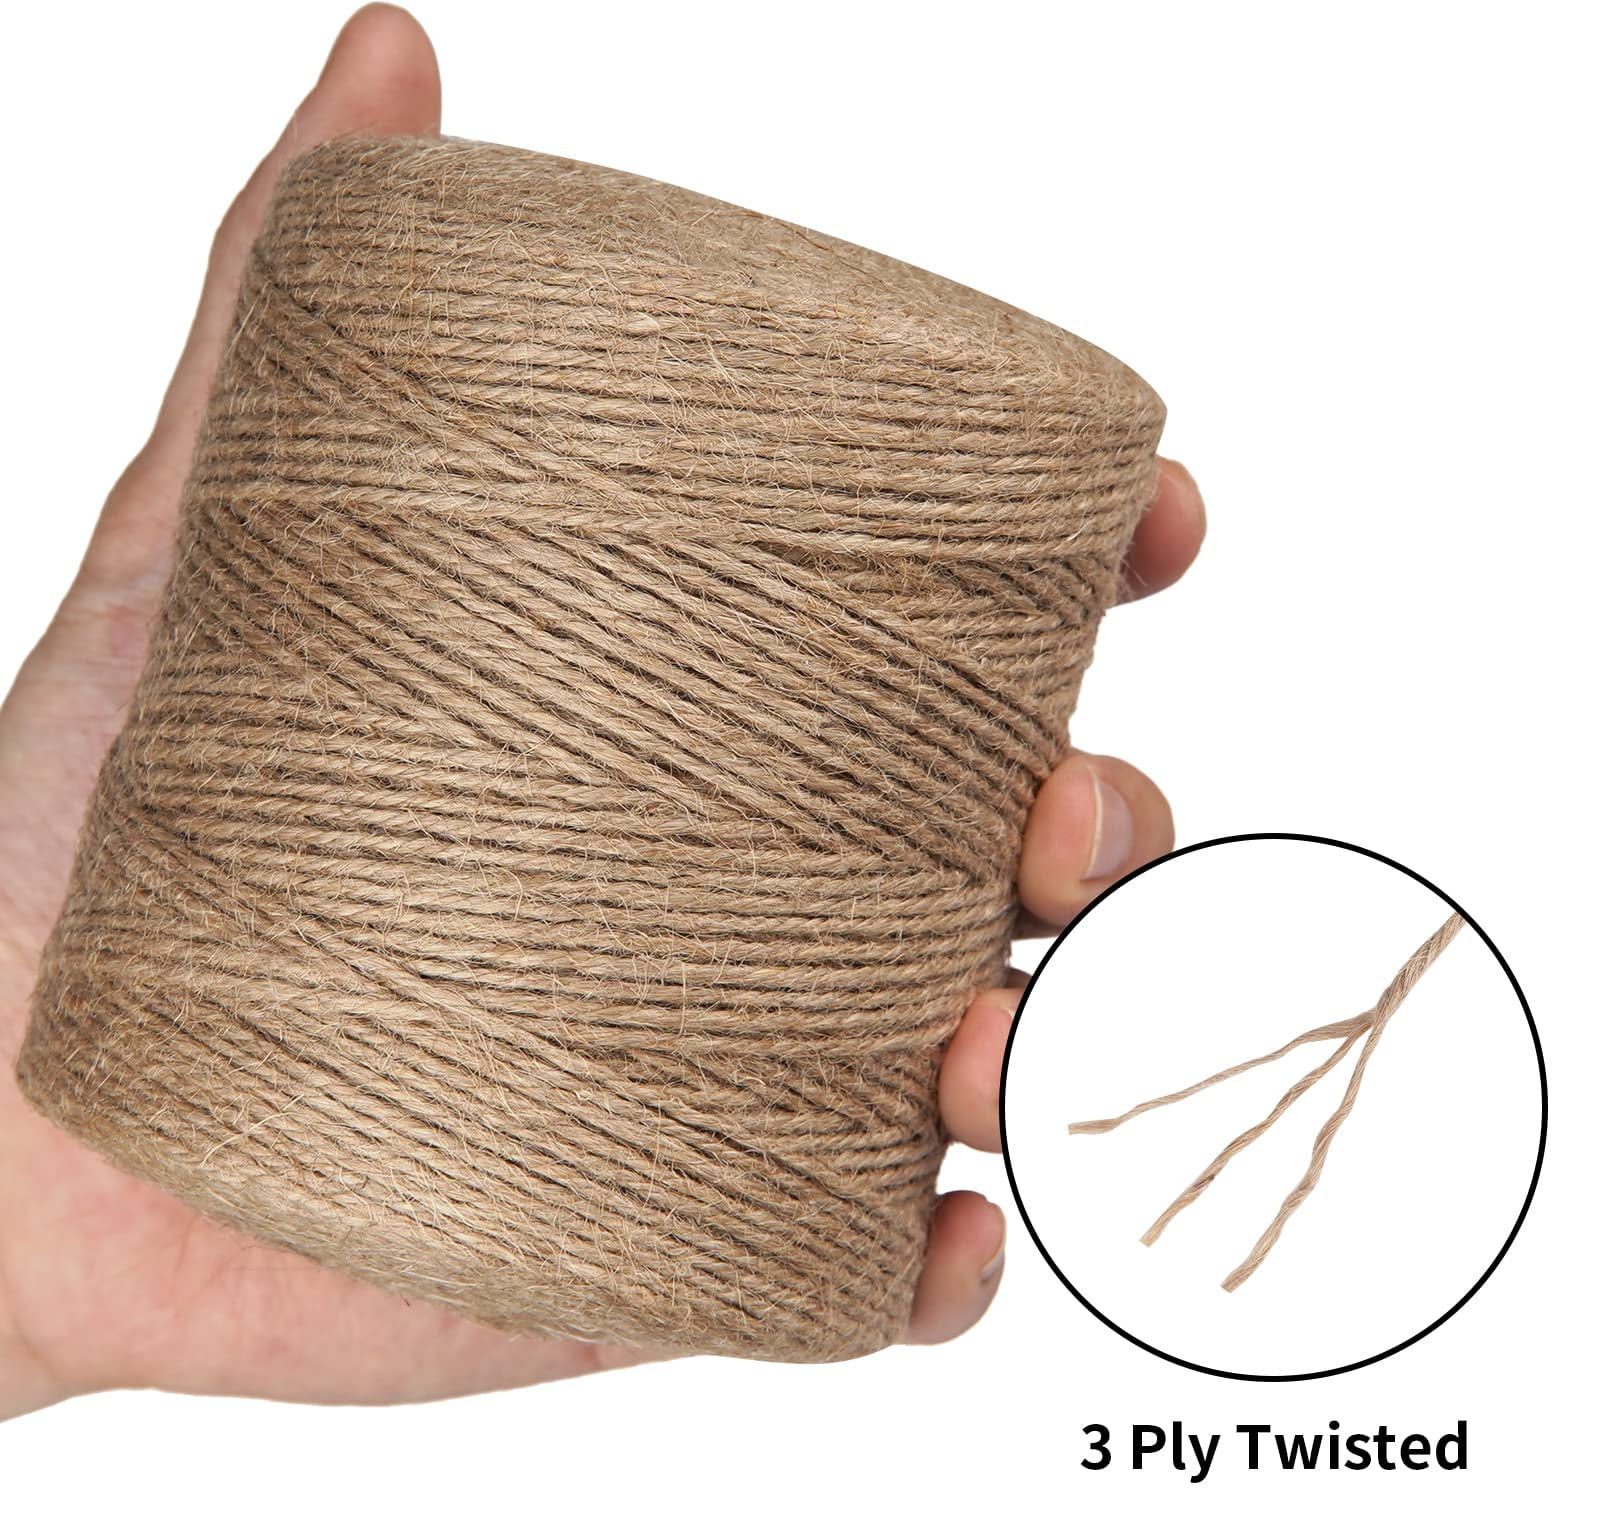 Baker Ross AG222 Natural Textured Hessian Jute Twine for Crafting (2mm x 100m)